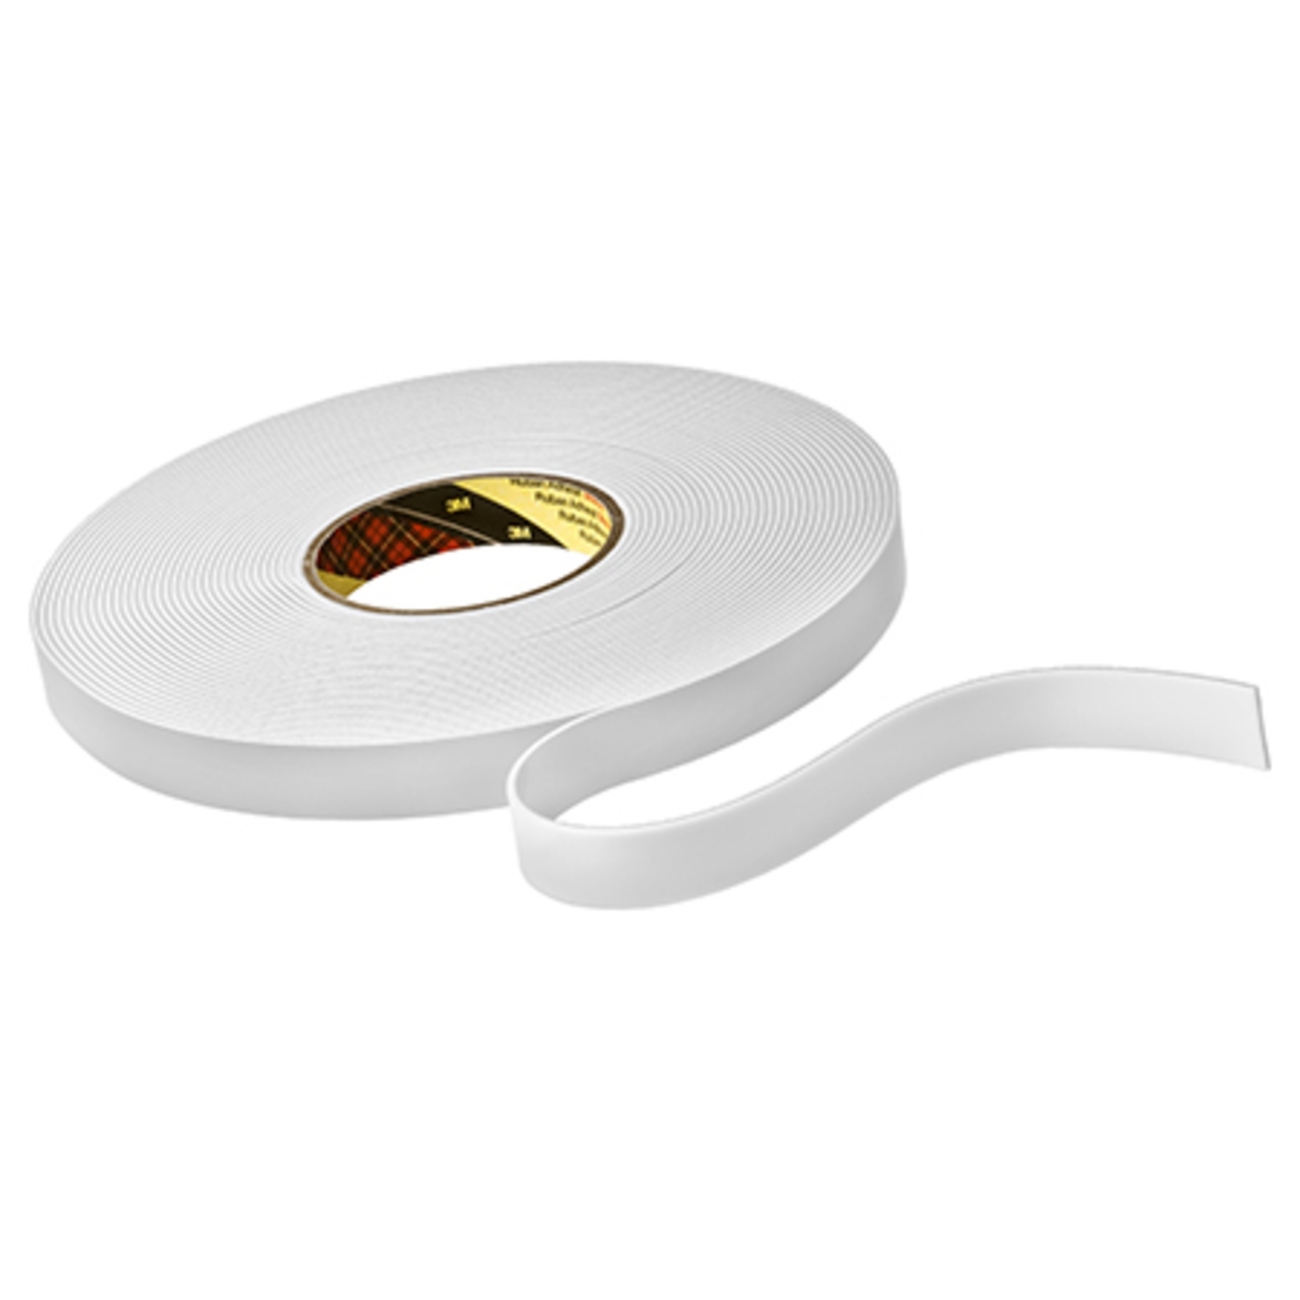 3M Double-sided PE foam tape with acrylic adhesive 9515W, white, 19 mm x 33 m, 1.5 mm